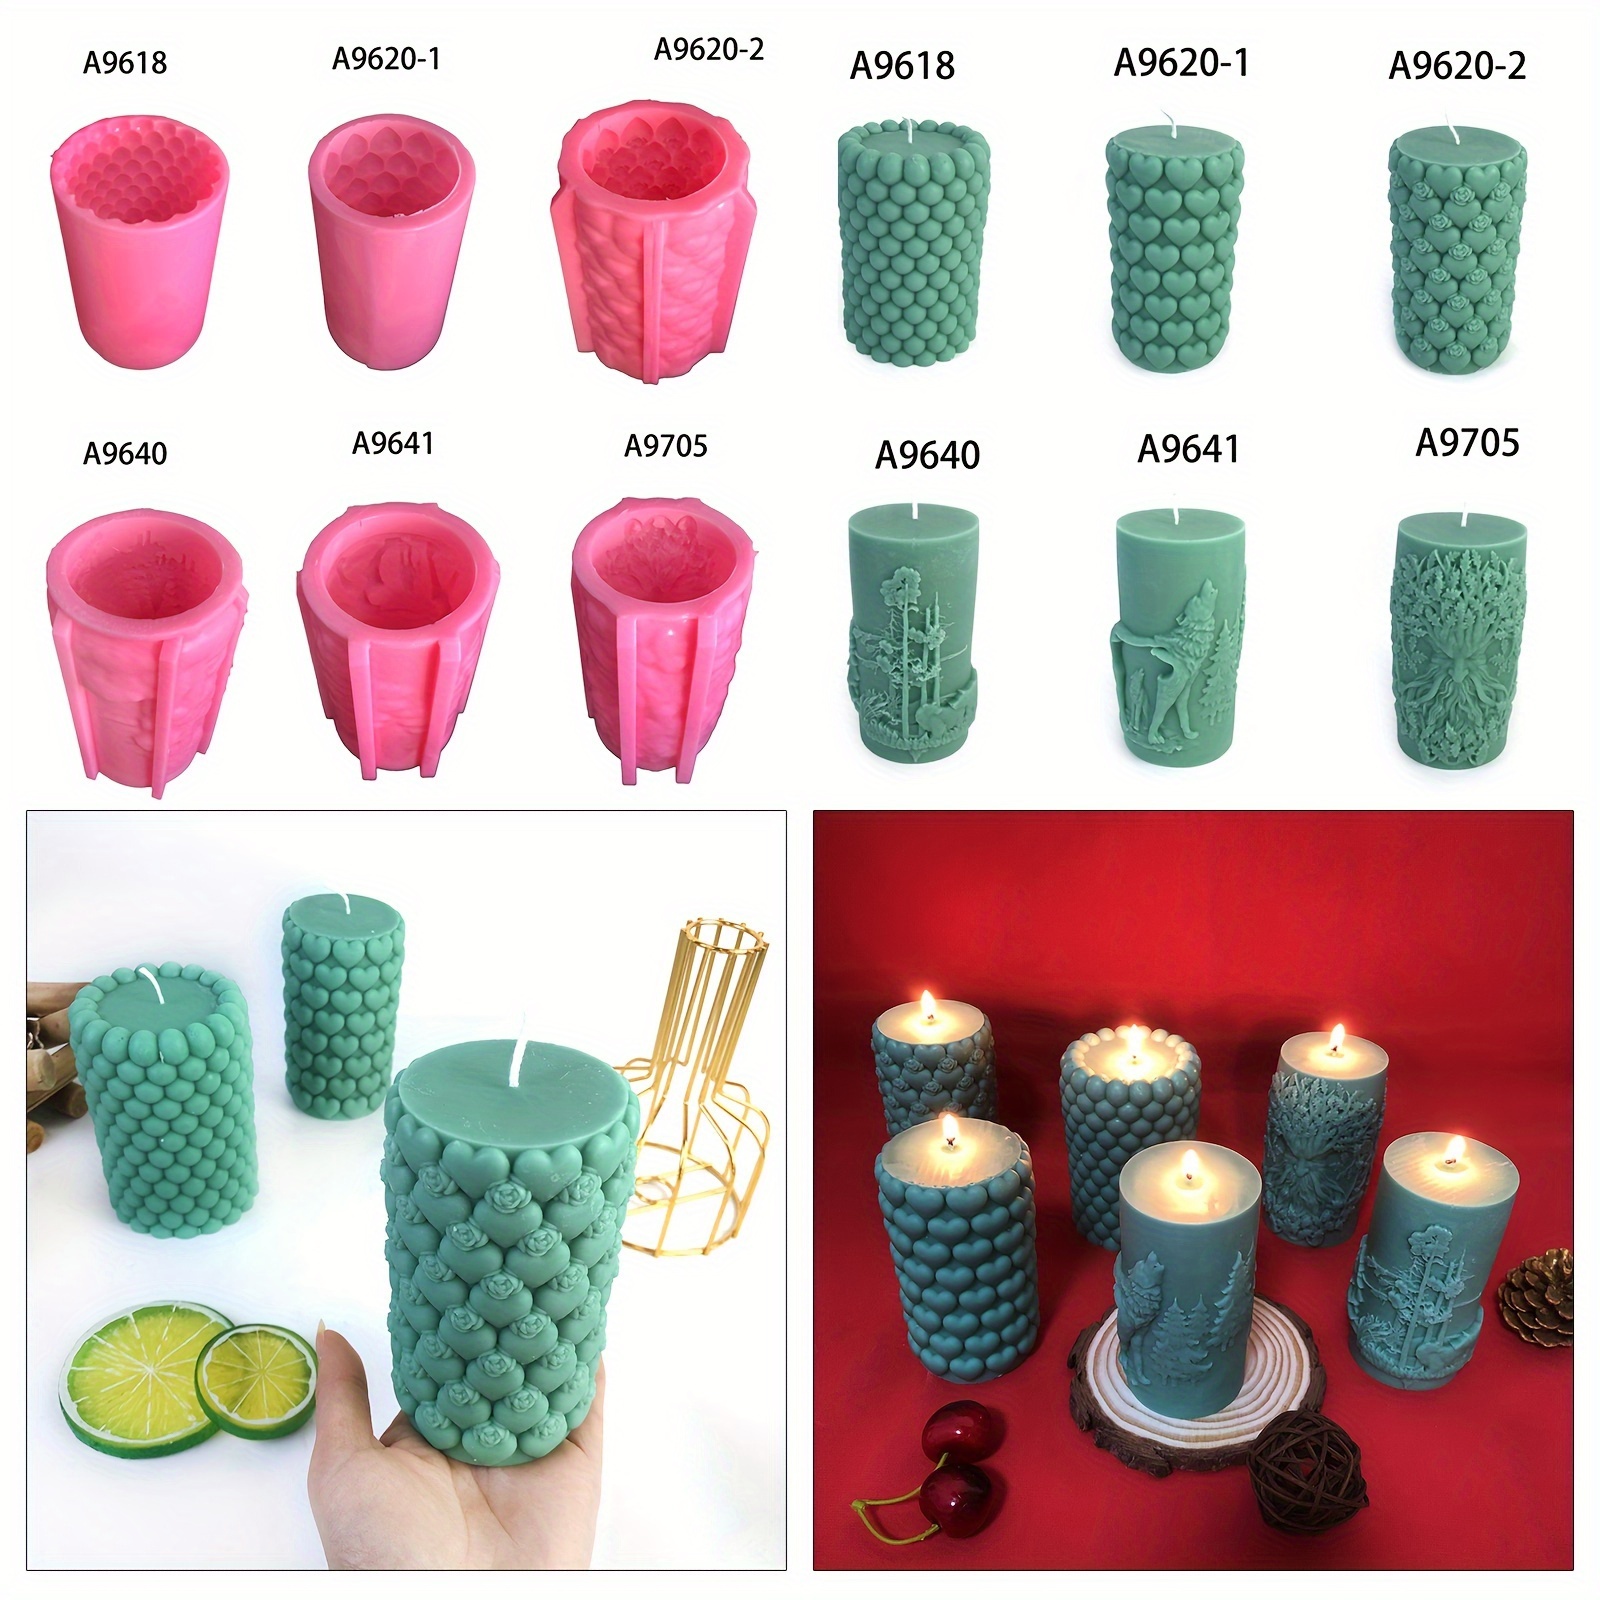 Candle Mold Non Stick Easy to Demold Silicone Cylindrical Shape DIY Crafting Soap Mold Baking Accessories-leaveforme, Size: 8.5, Short